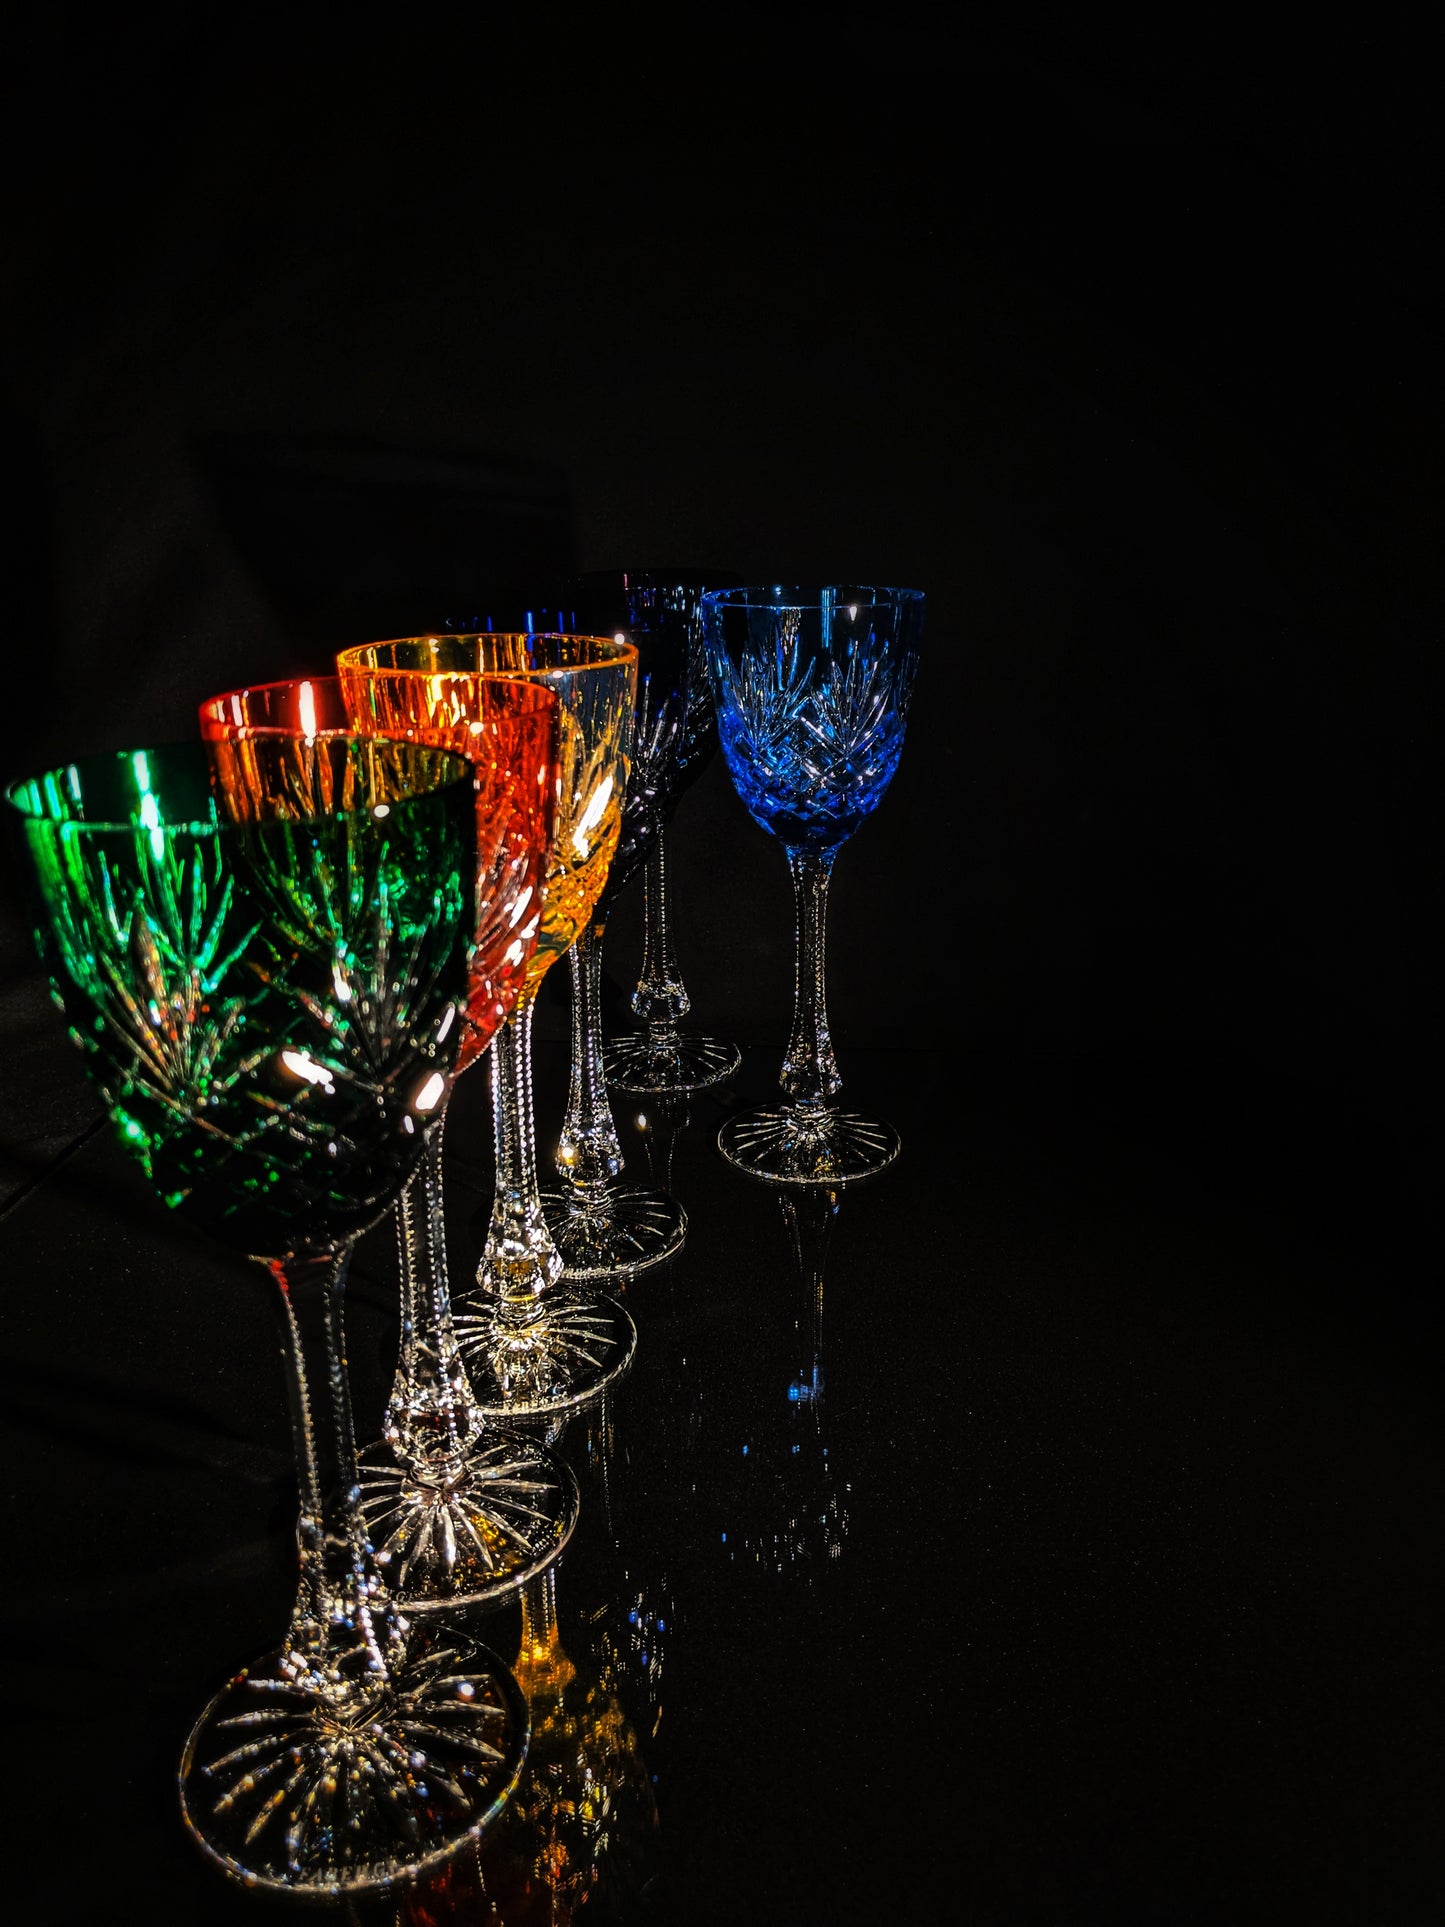 Faberge Odessa Colored Crystal Glasses